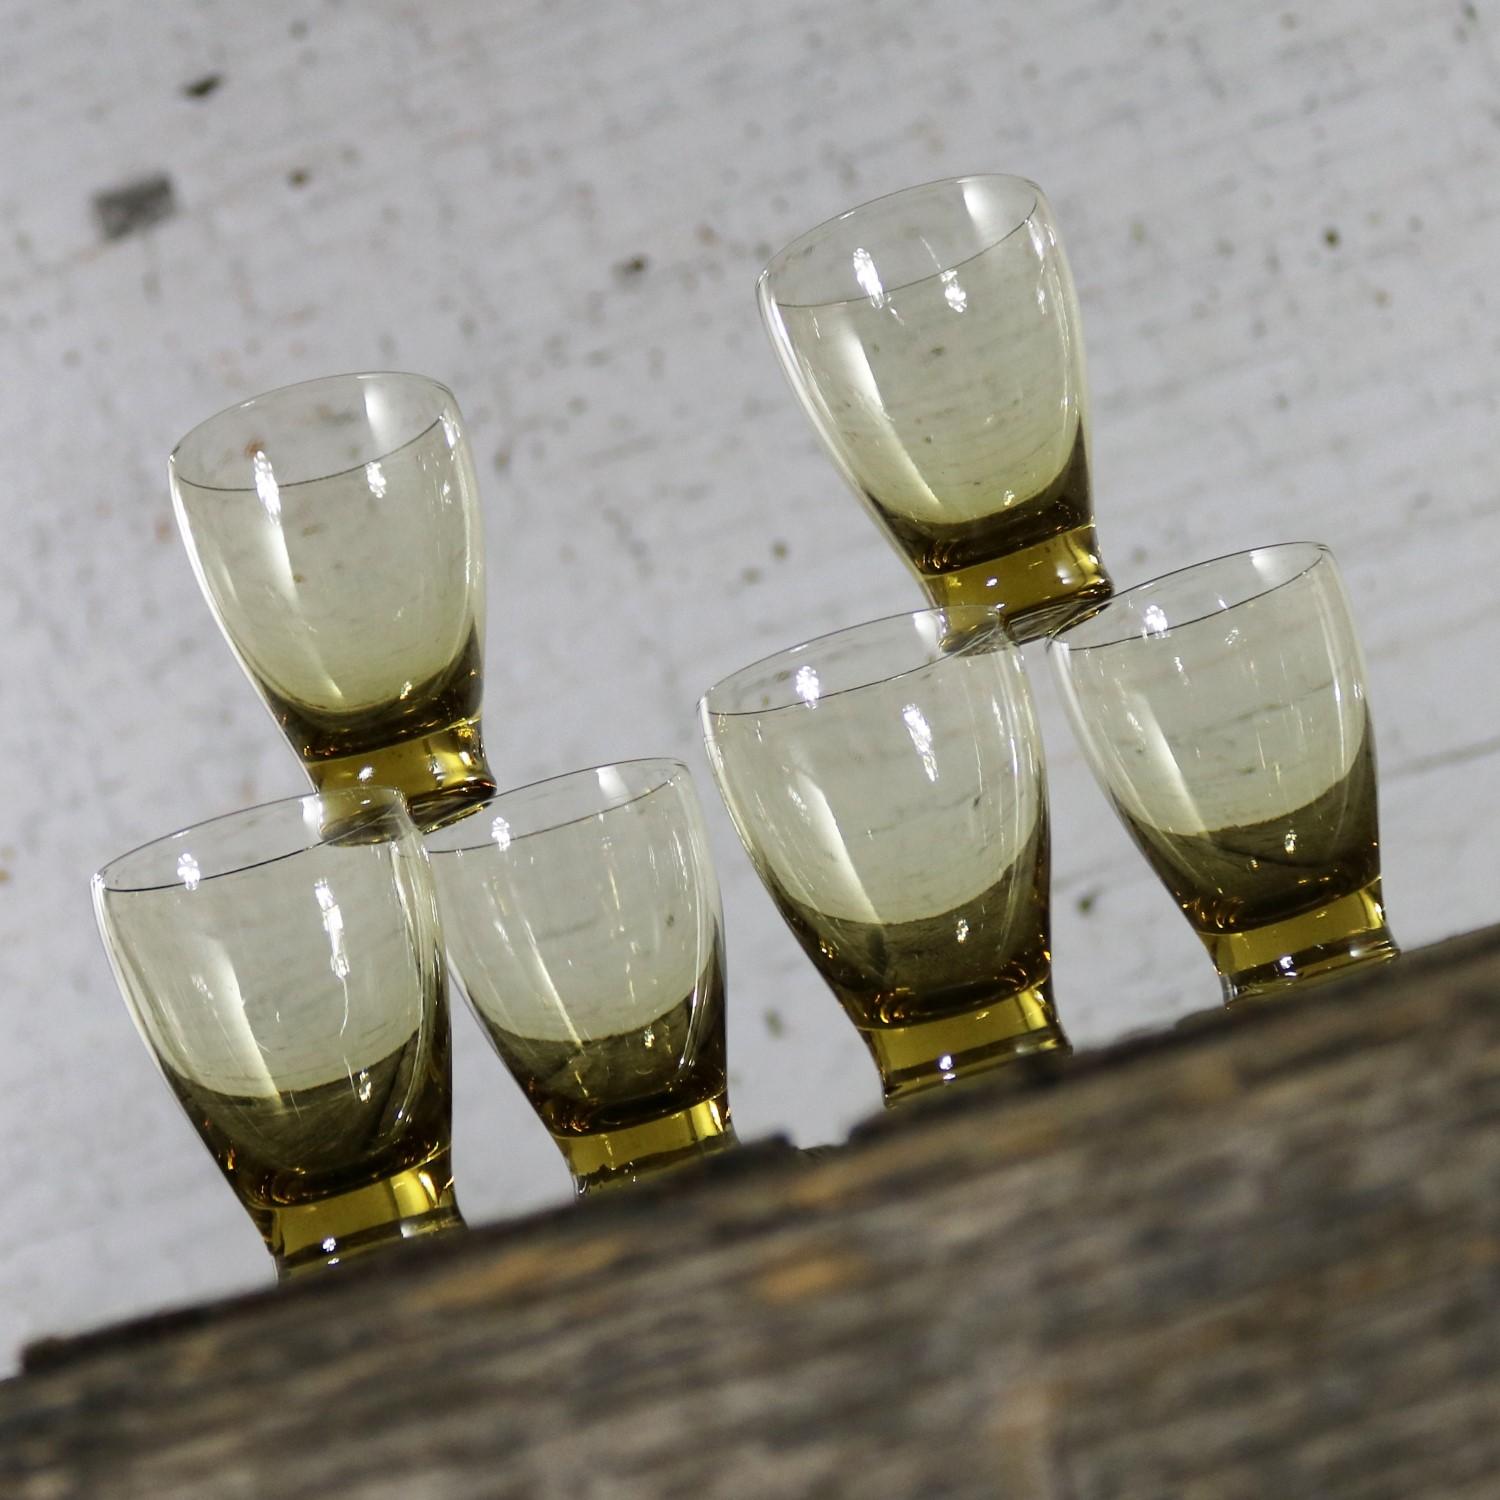 Awesome set of six Russel Wright chartreuse, but they look yellow or amber, Morgantown American Modern juice glasses. They are in excellent vintage condition with no chips cracks or chiggers, circa 1950s.

I really admire the gently curving shape